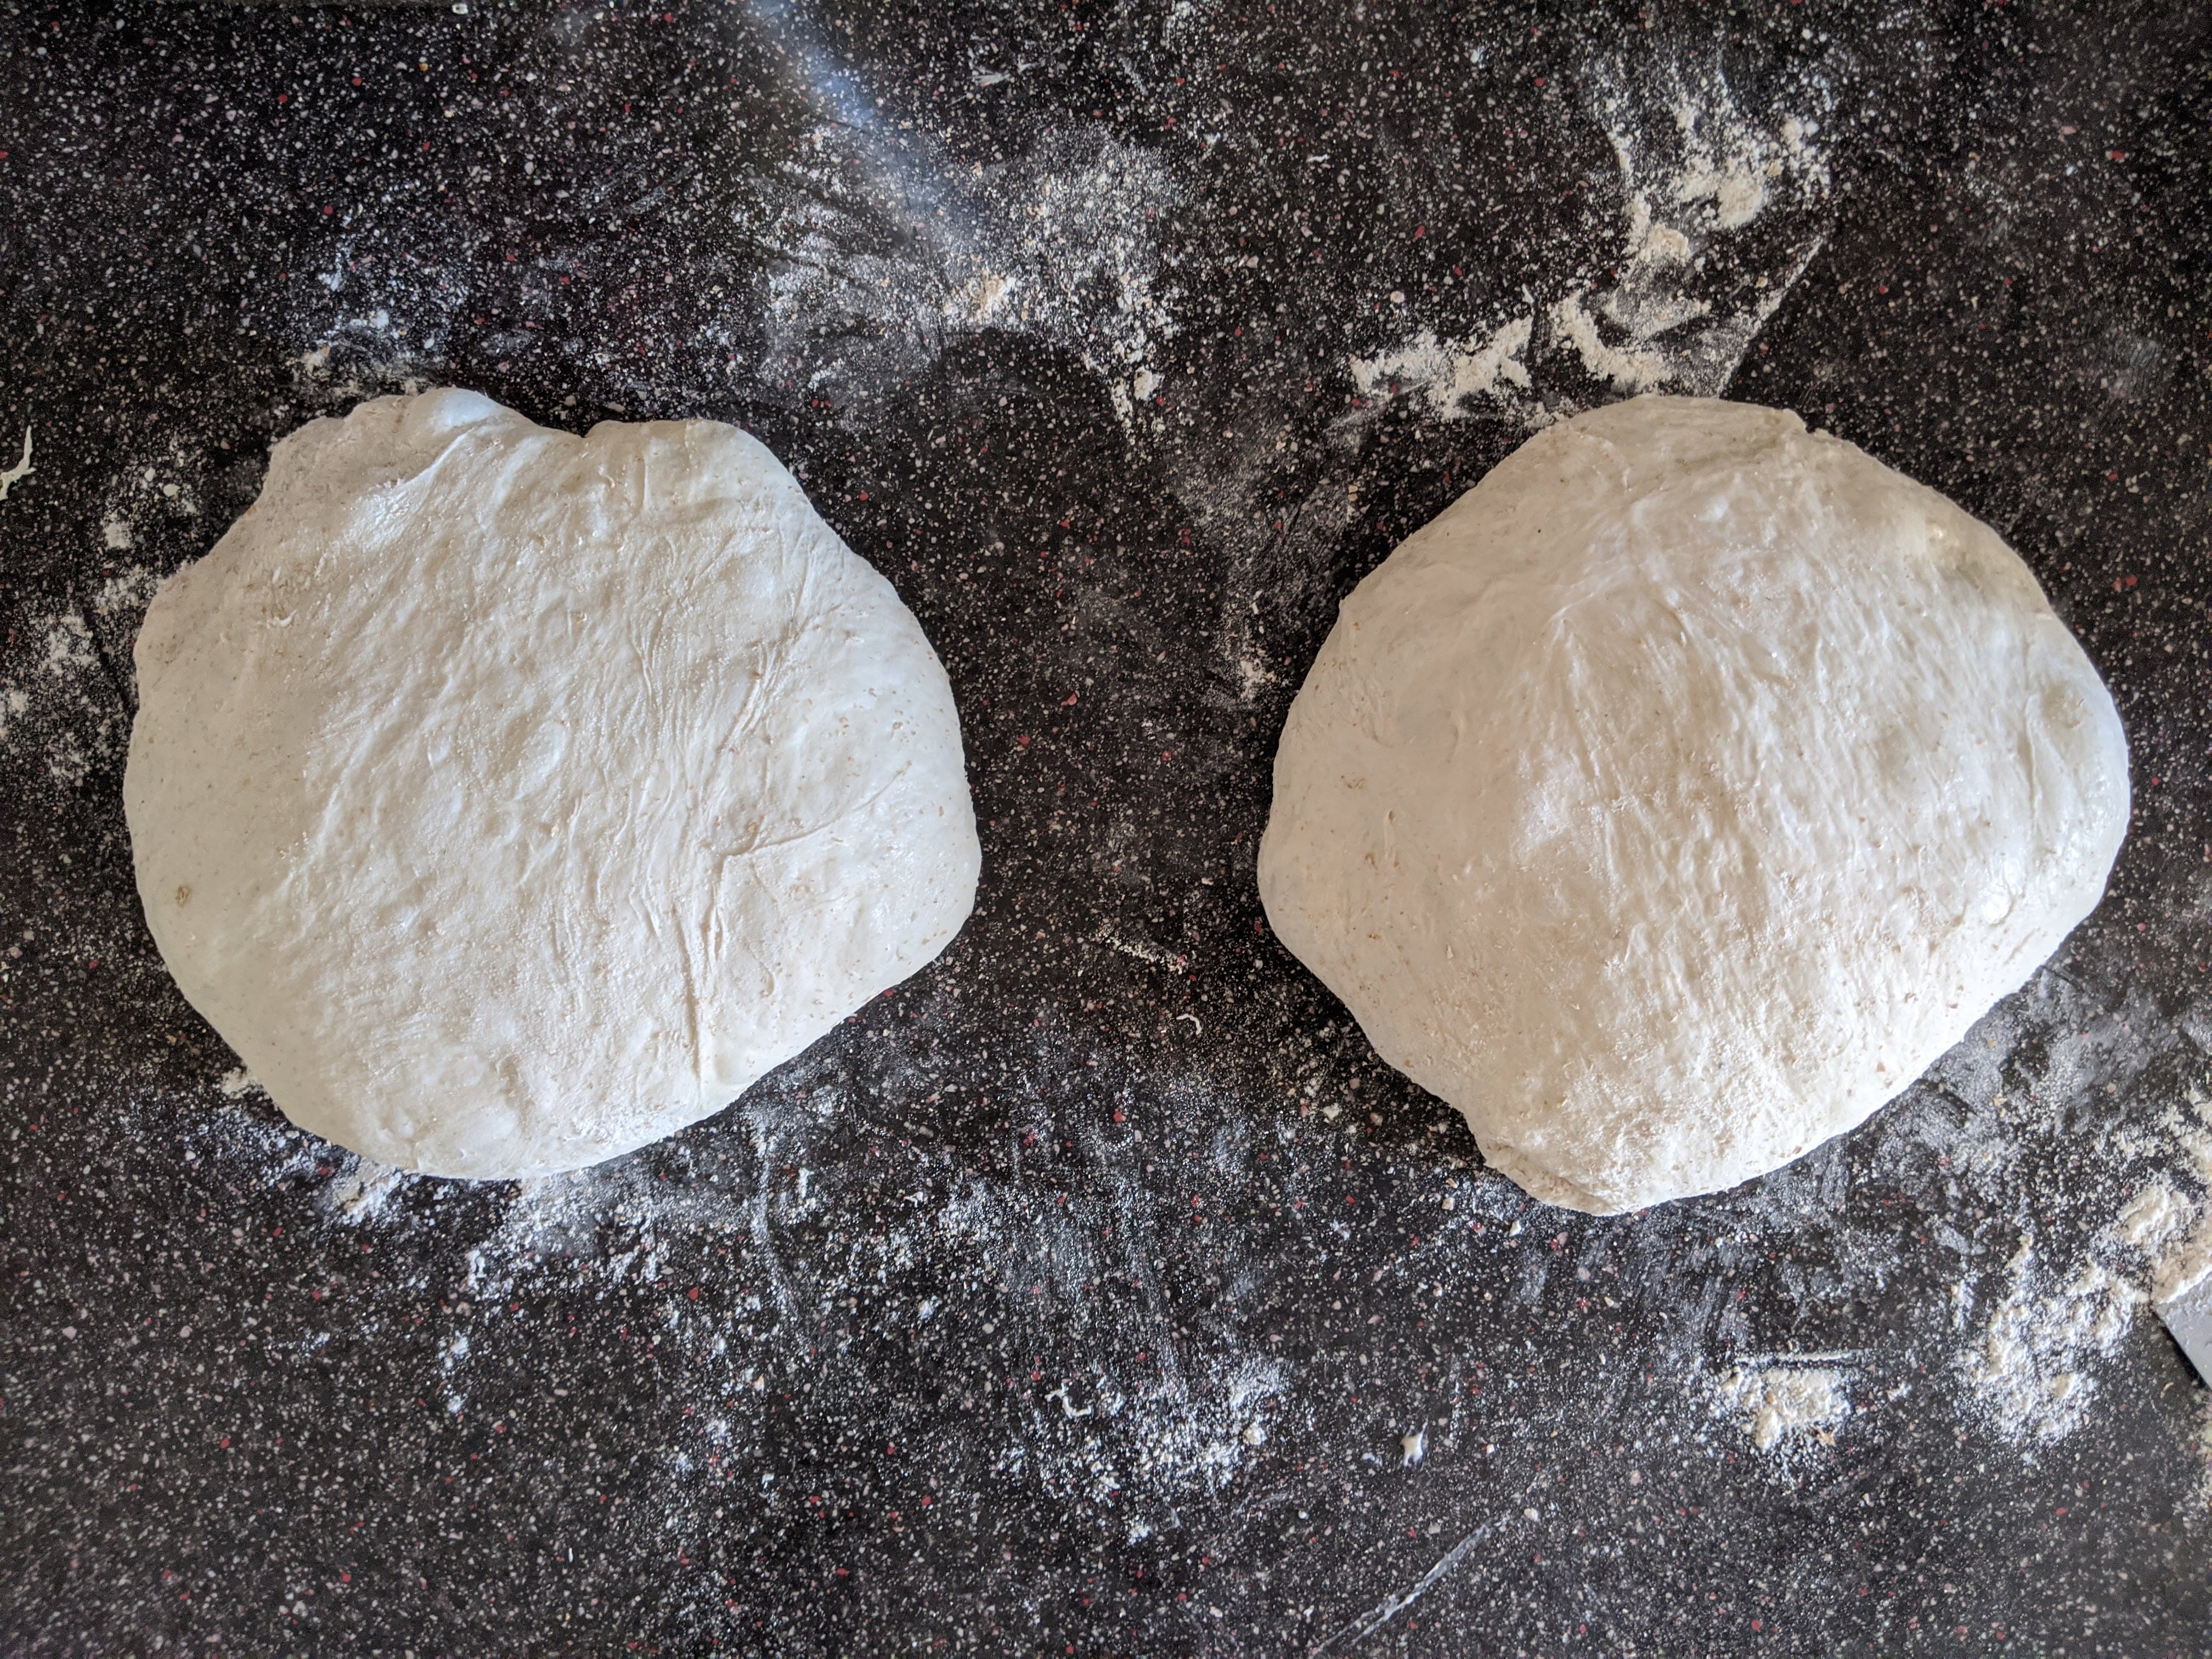 The dough before going into proofing baskets